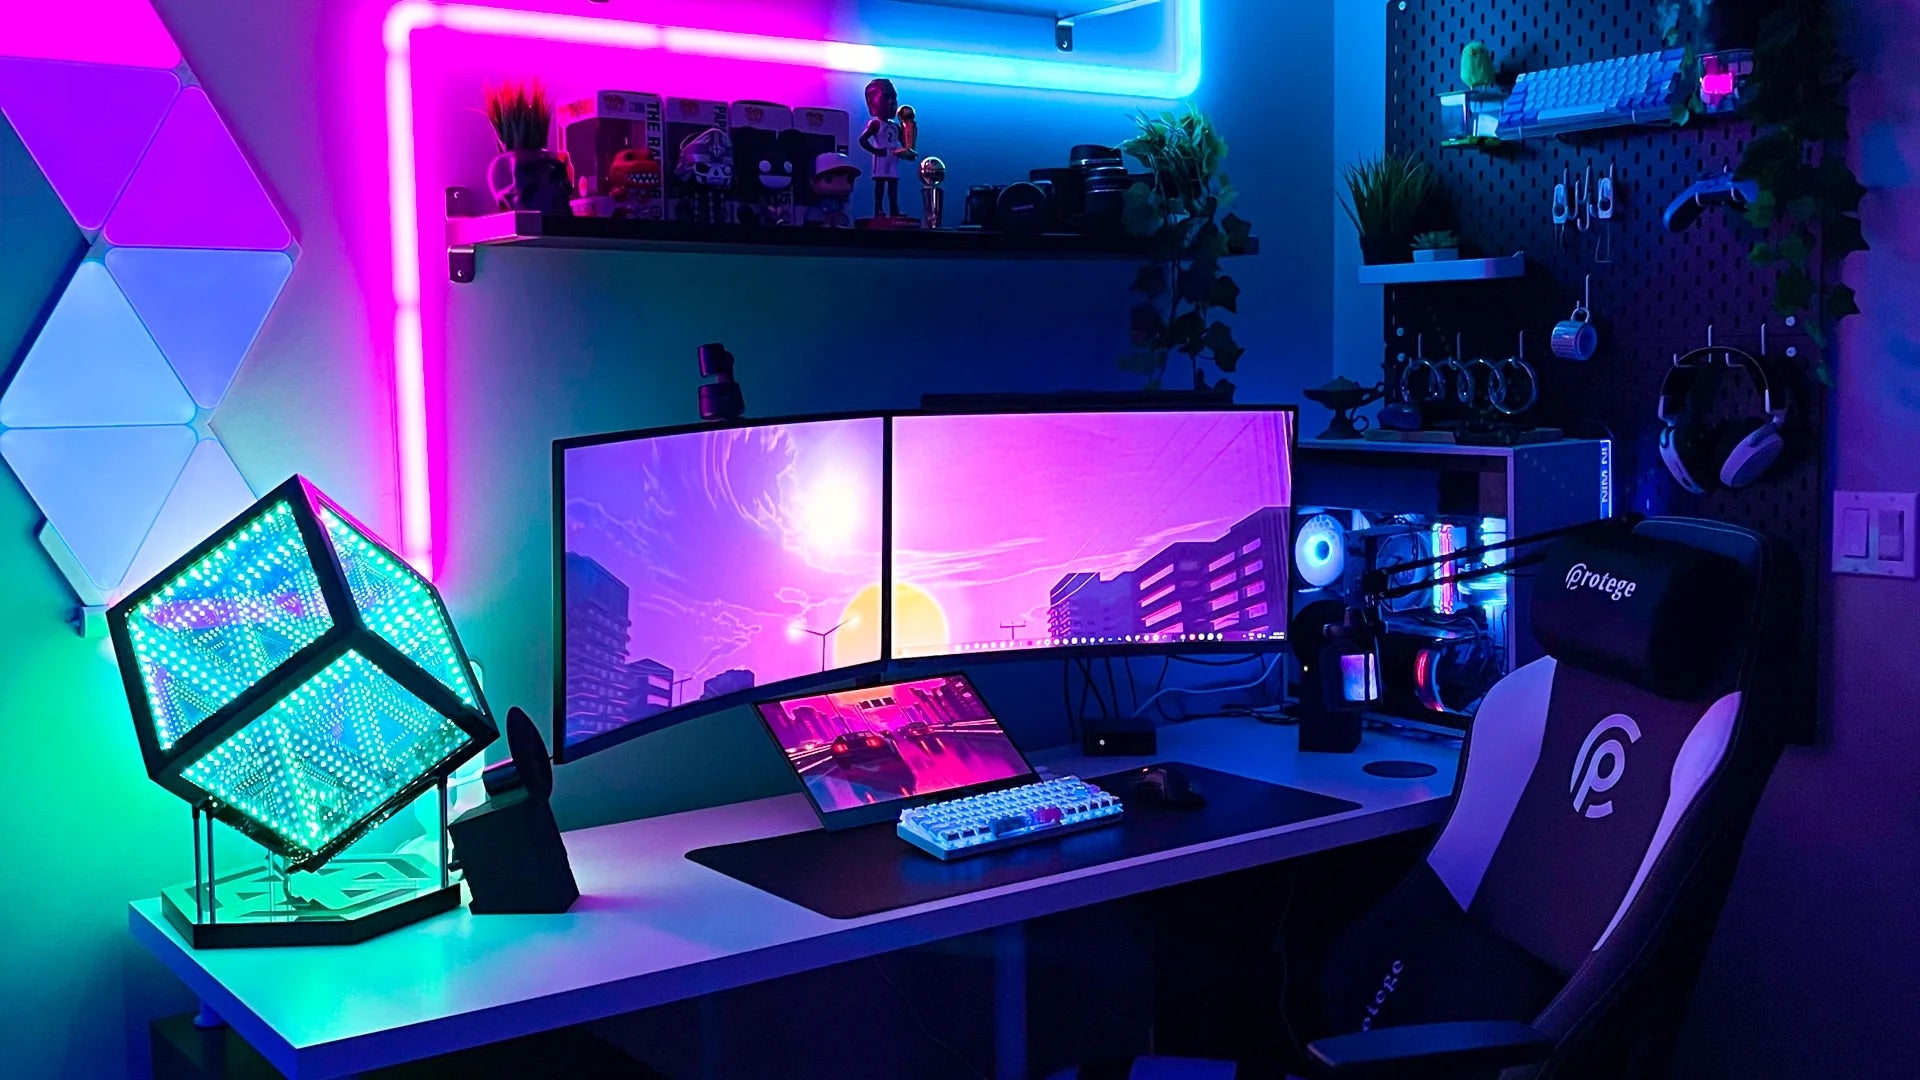 Gamer computer-set up with LED strip lights and a HyperCube for decorative lighting ideas